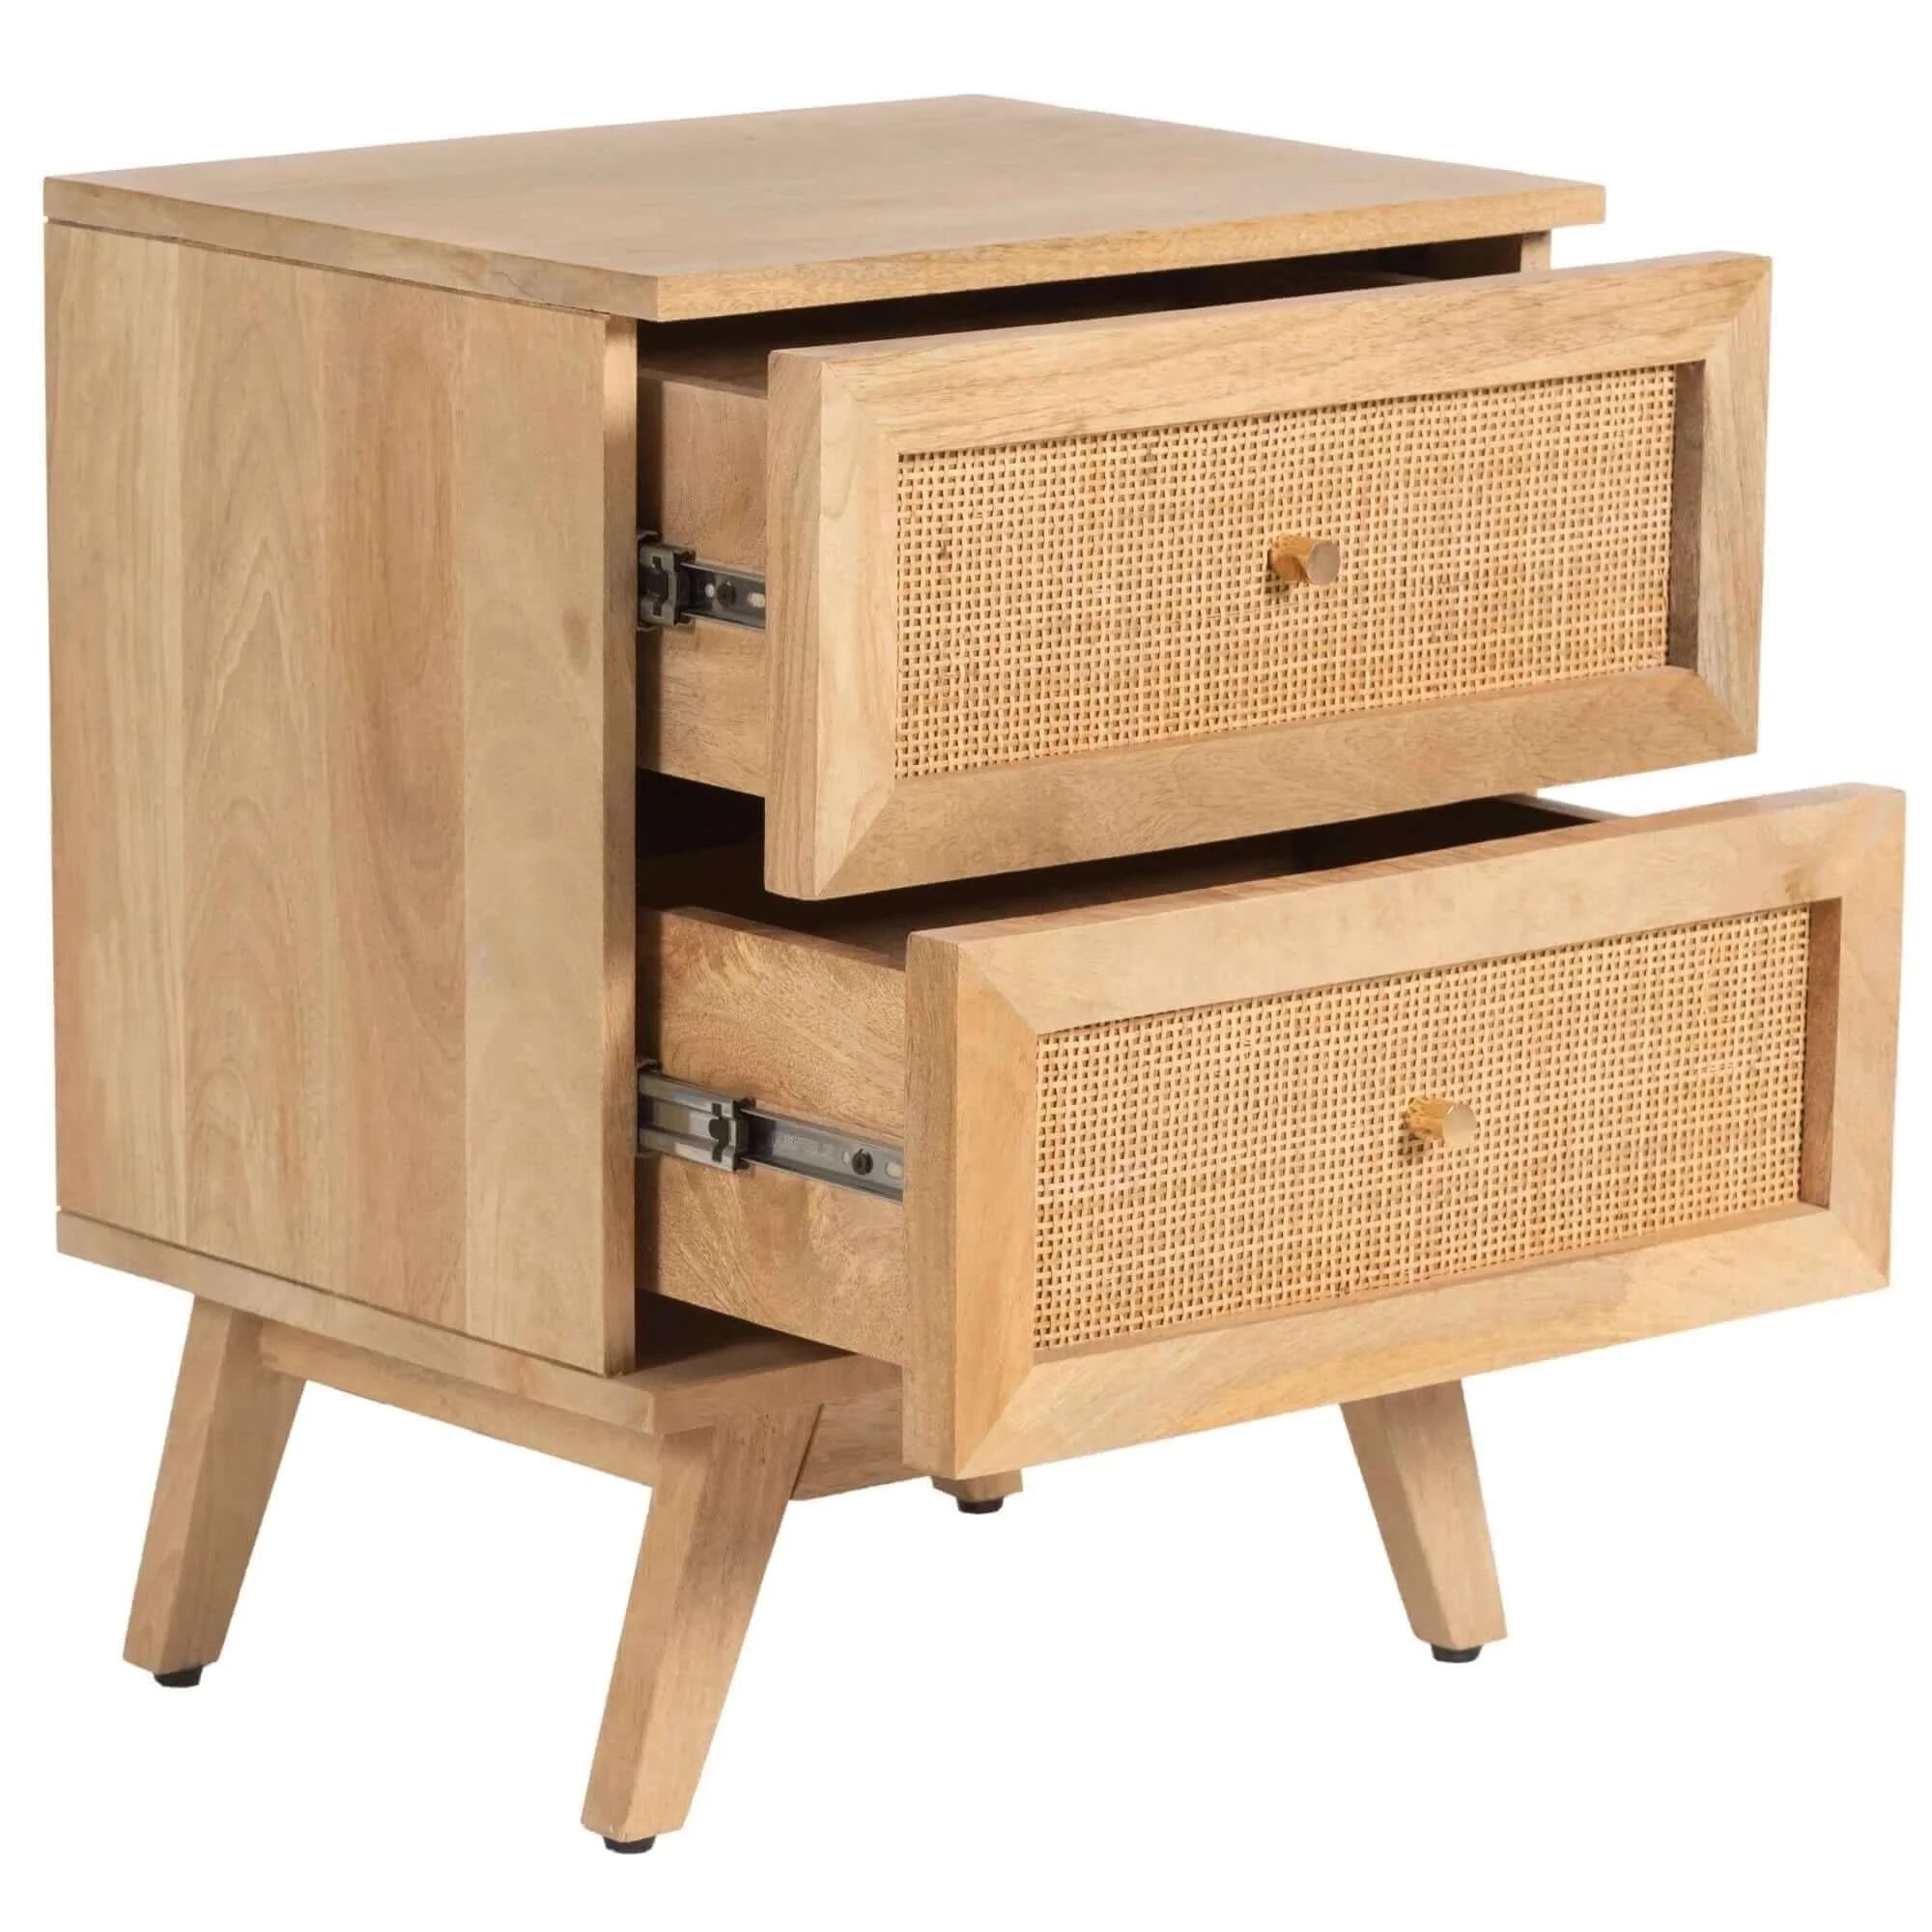 Buy olearia bedside table 2 drawer storage cabinet solid mango wood rattan natural - upinteriors-Upinteriors